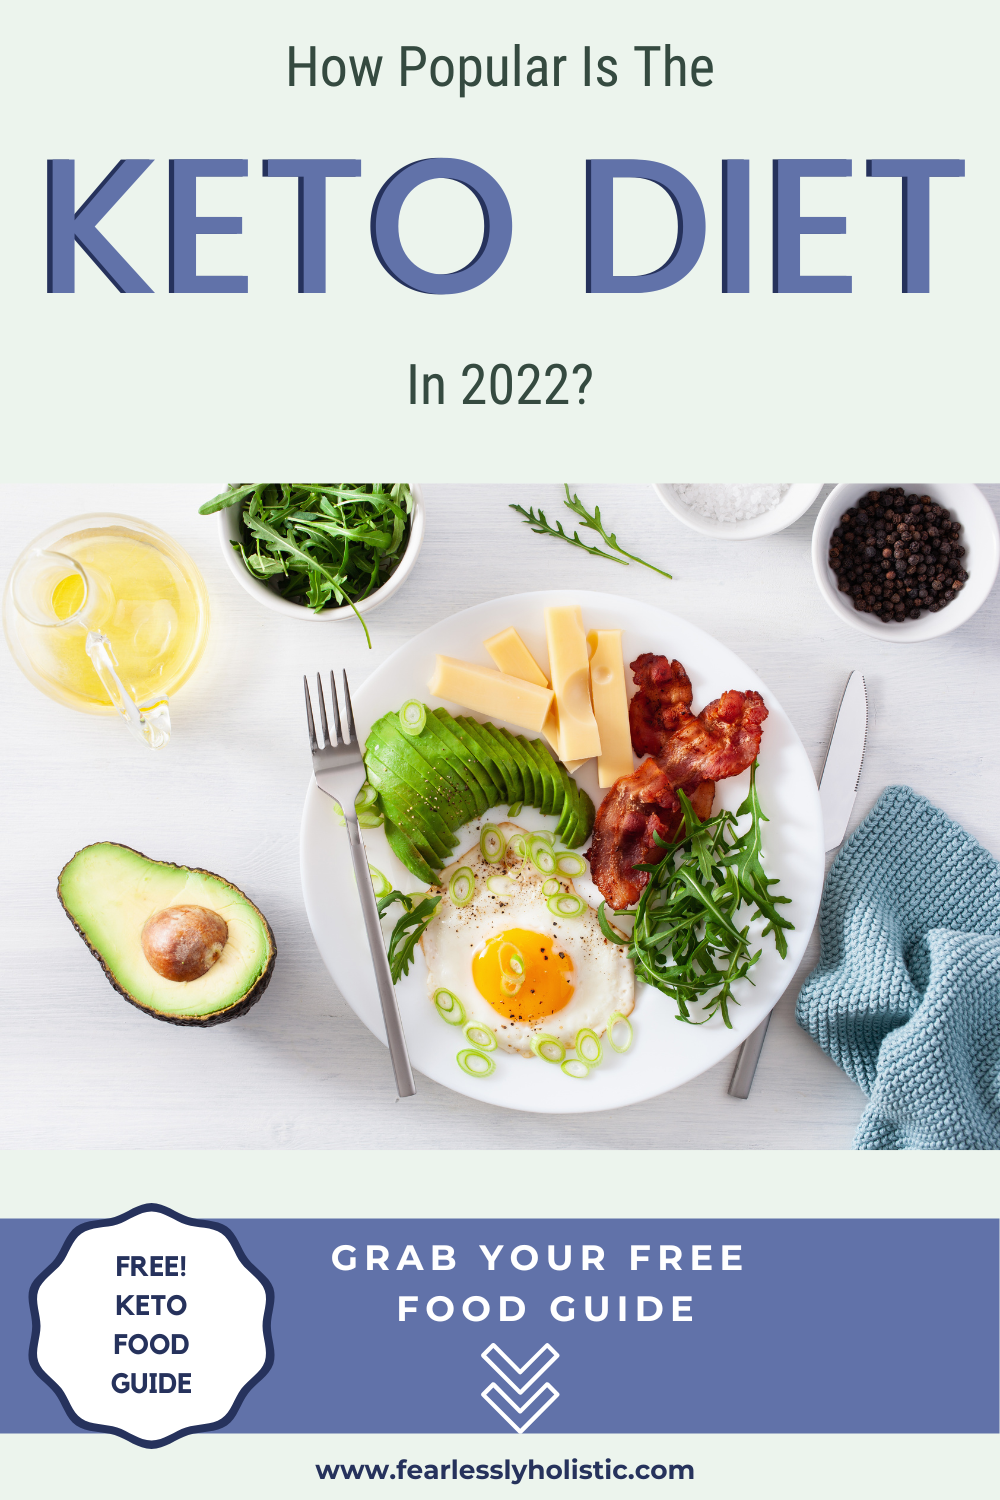 How Popular Is The Keto Diet?